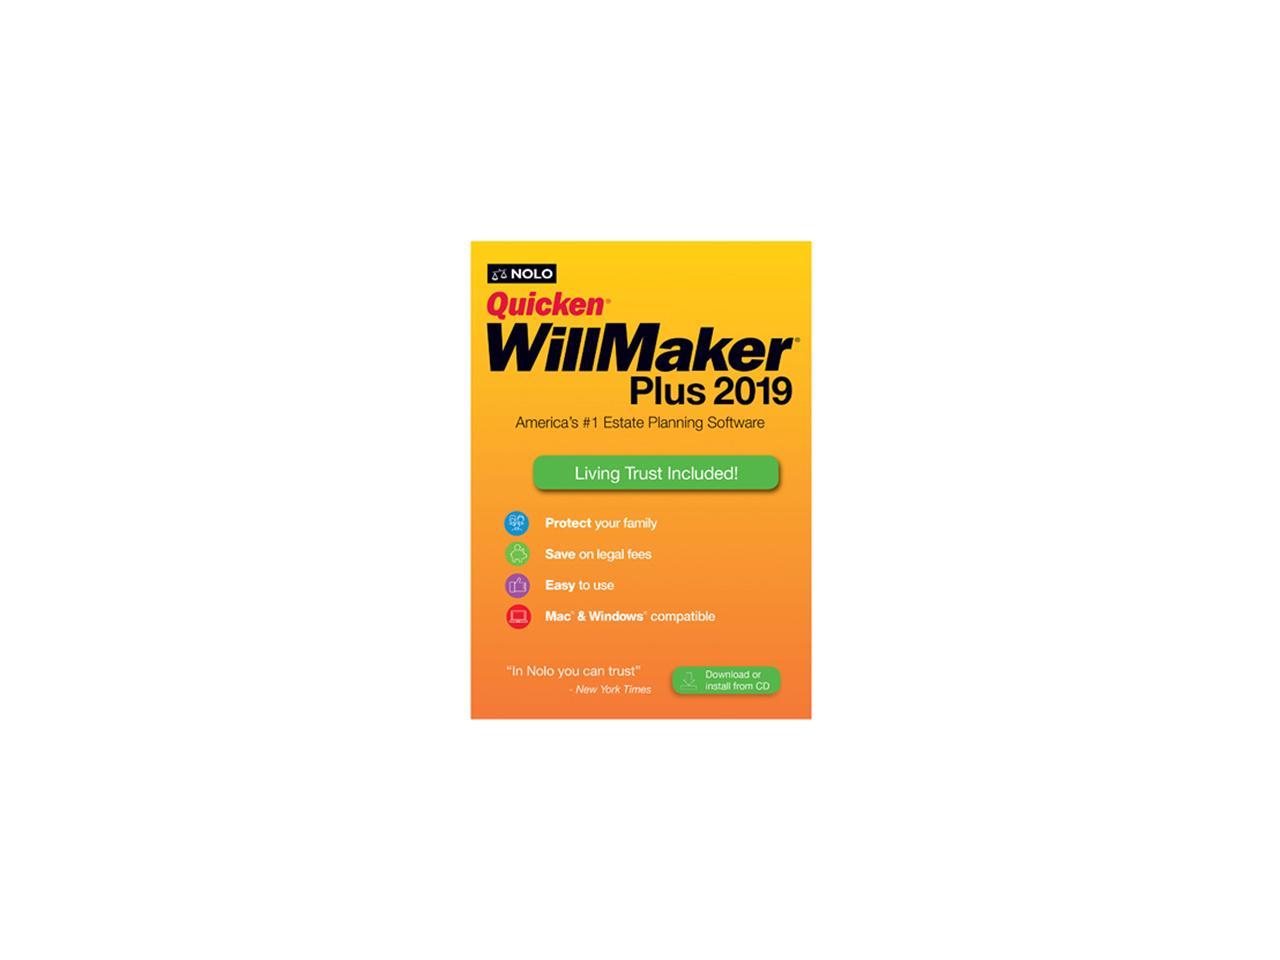 nolo quicken willmaker plus 2019 book and software kit